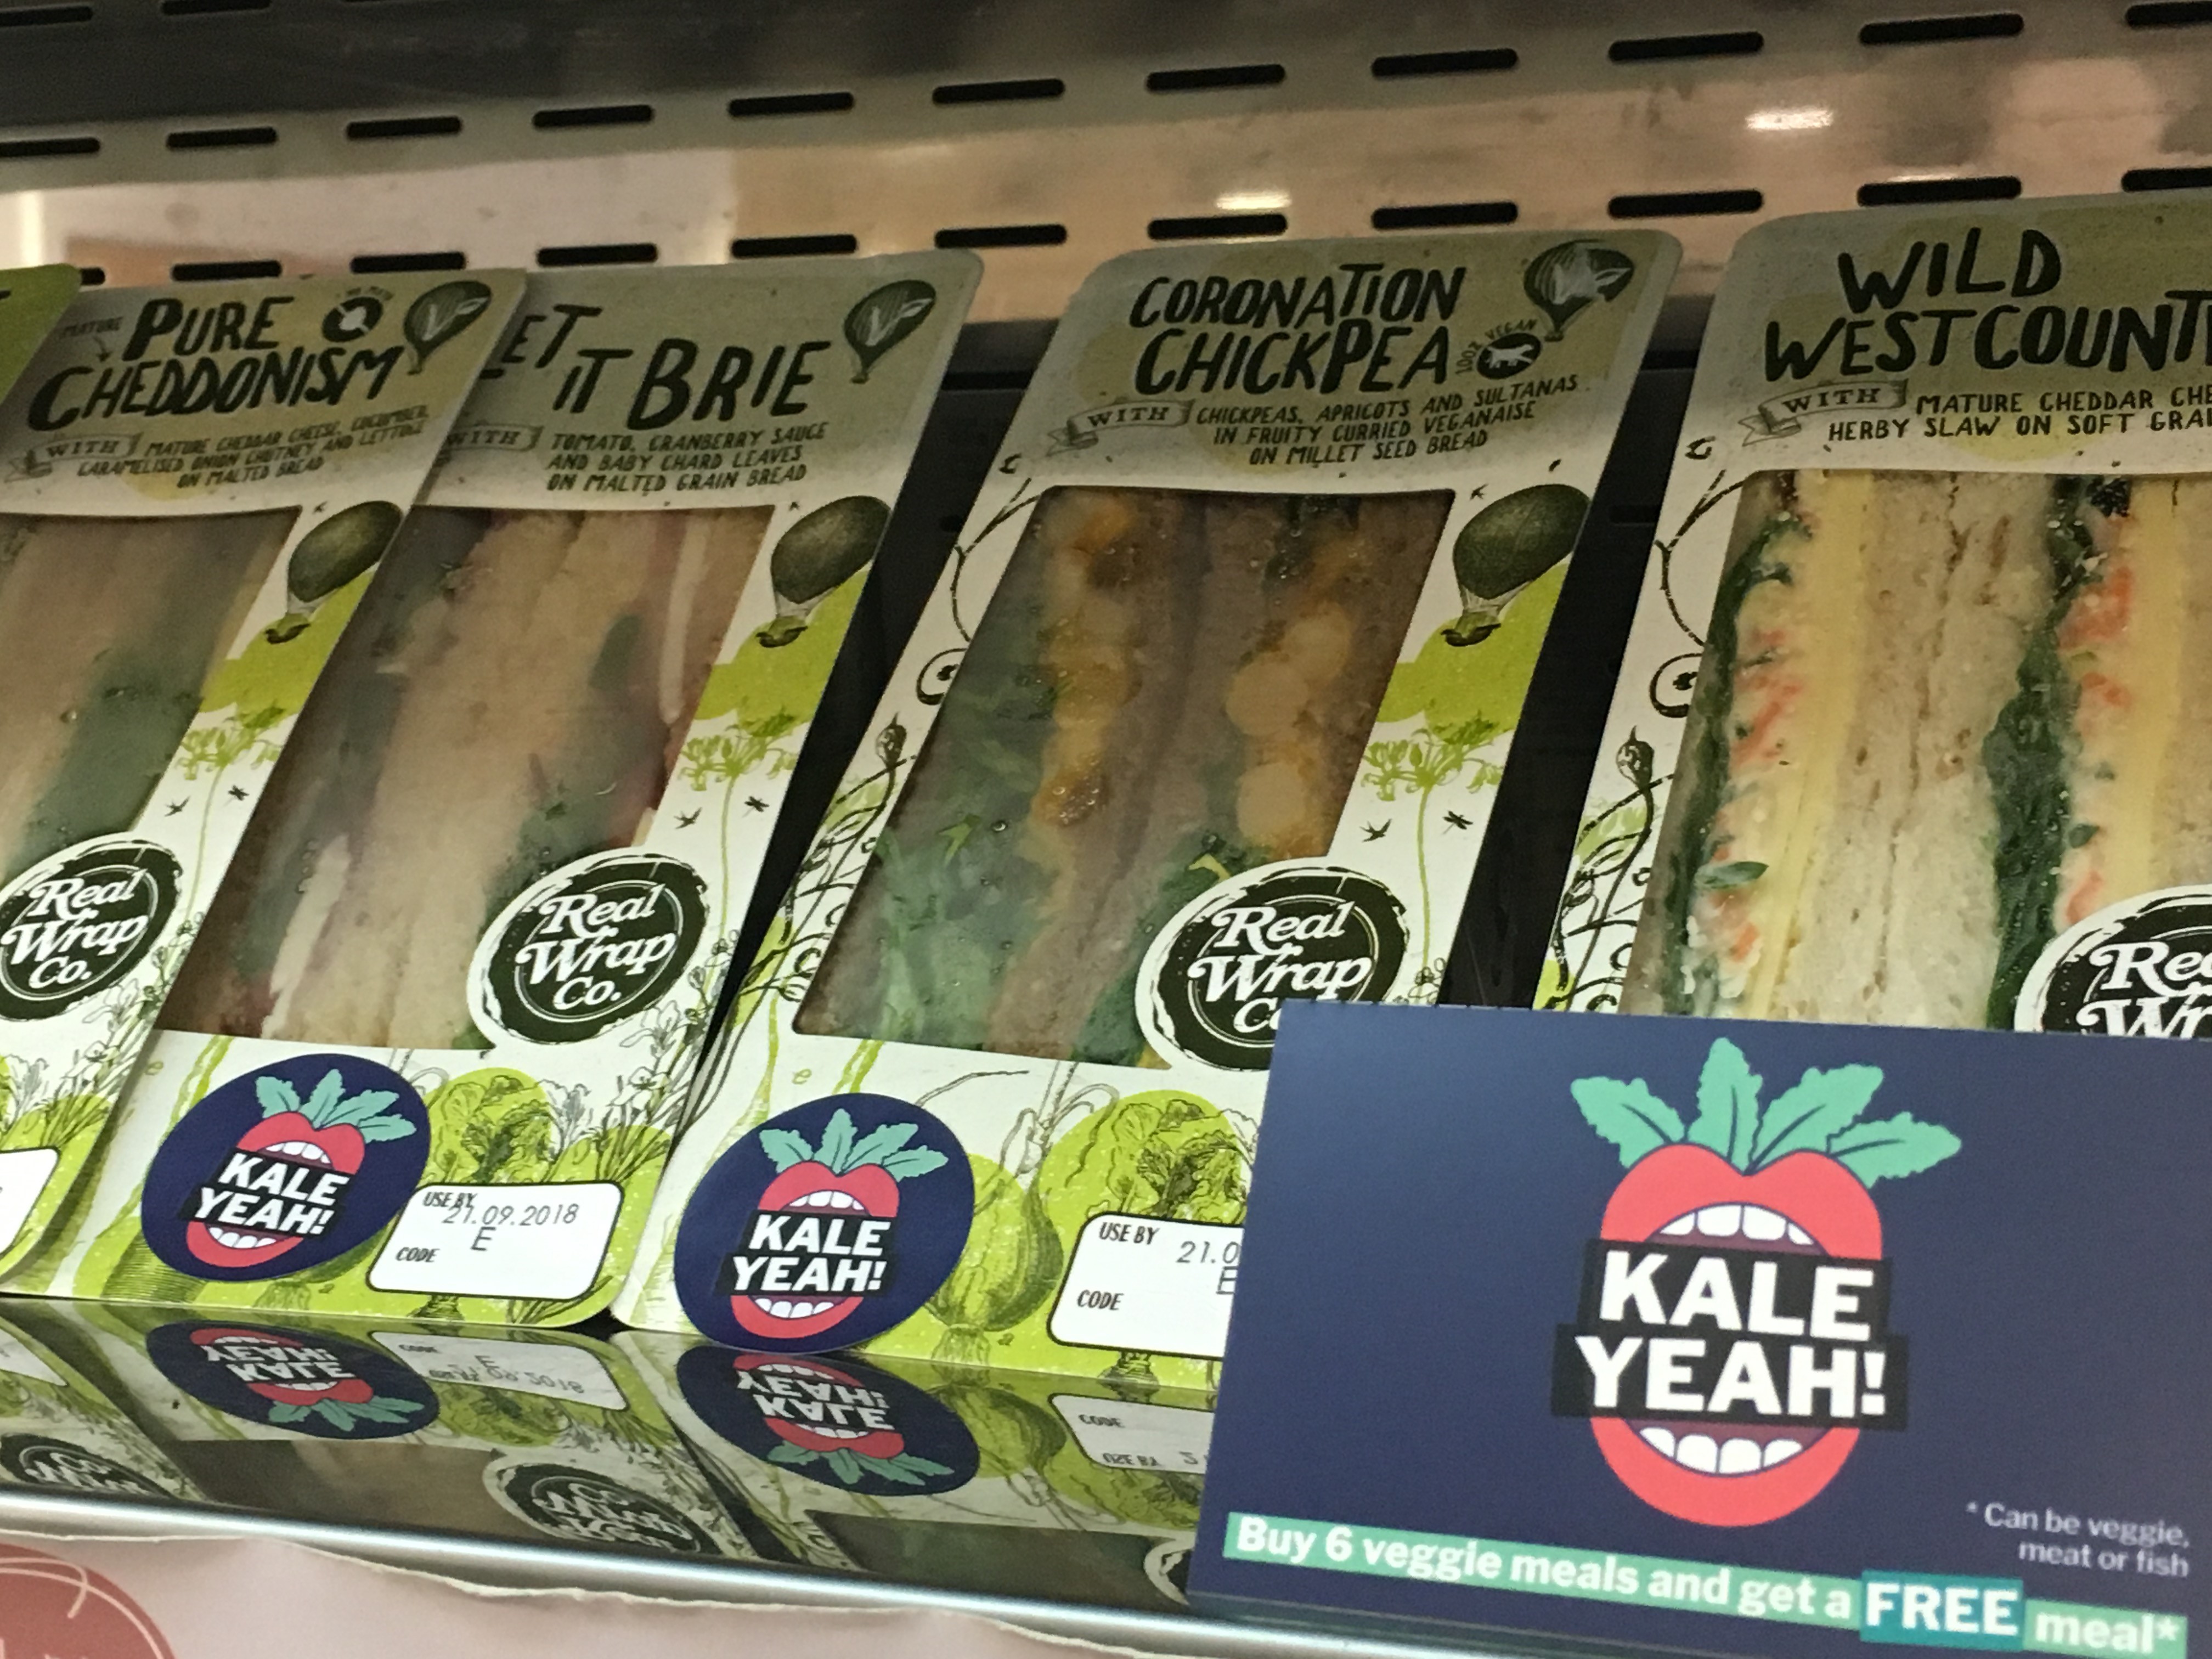 Kale Yeah! sandwiches with a loyalty card in front of them